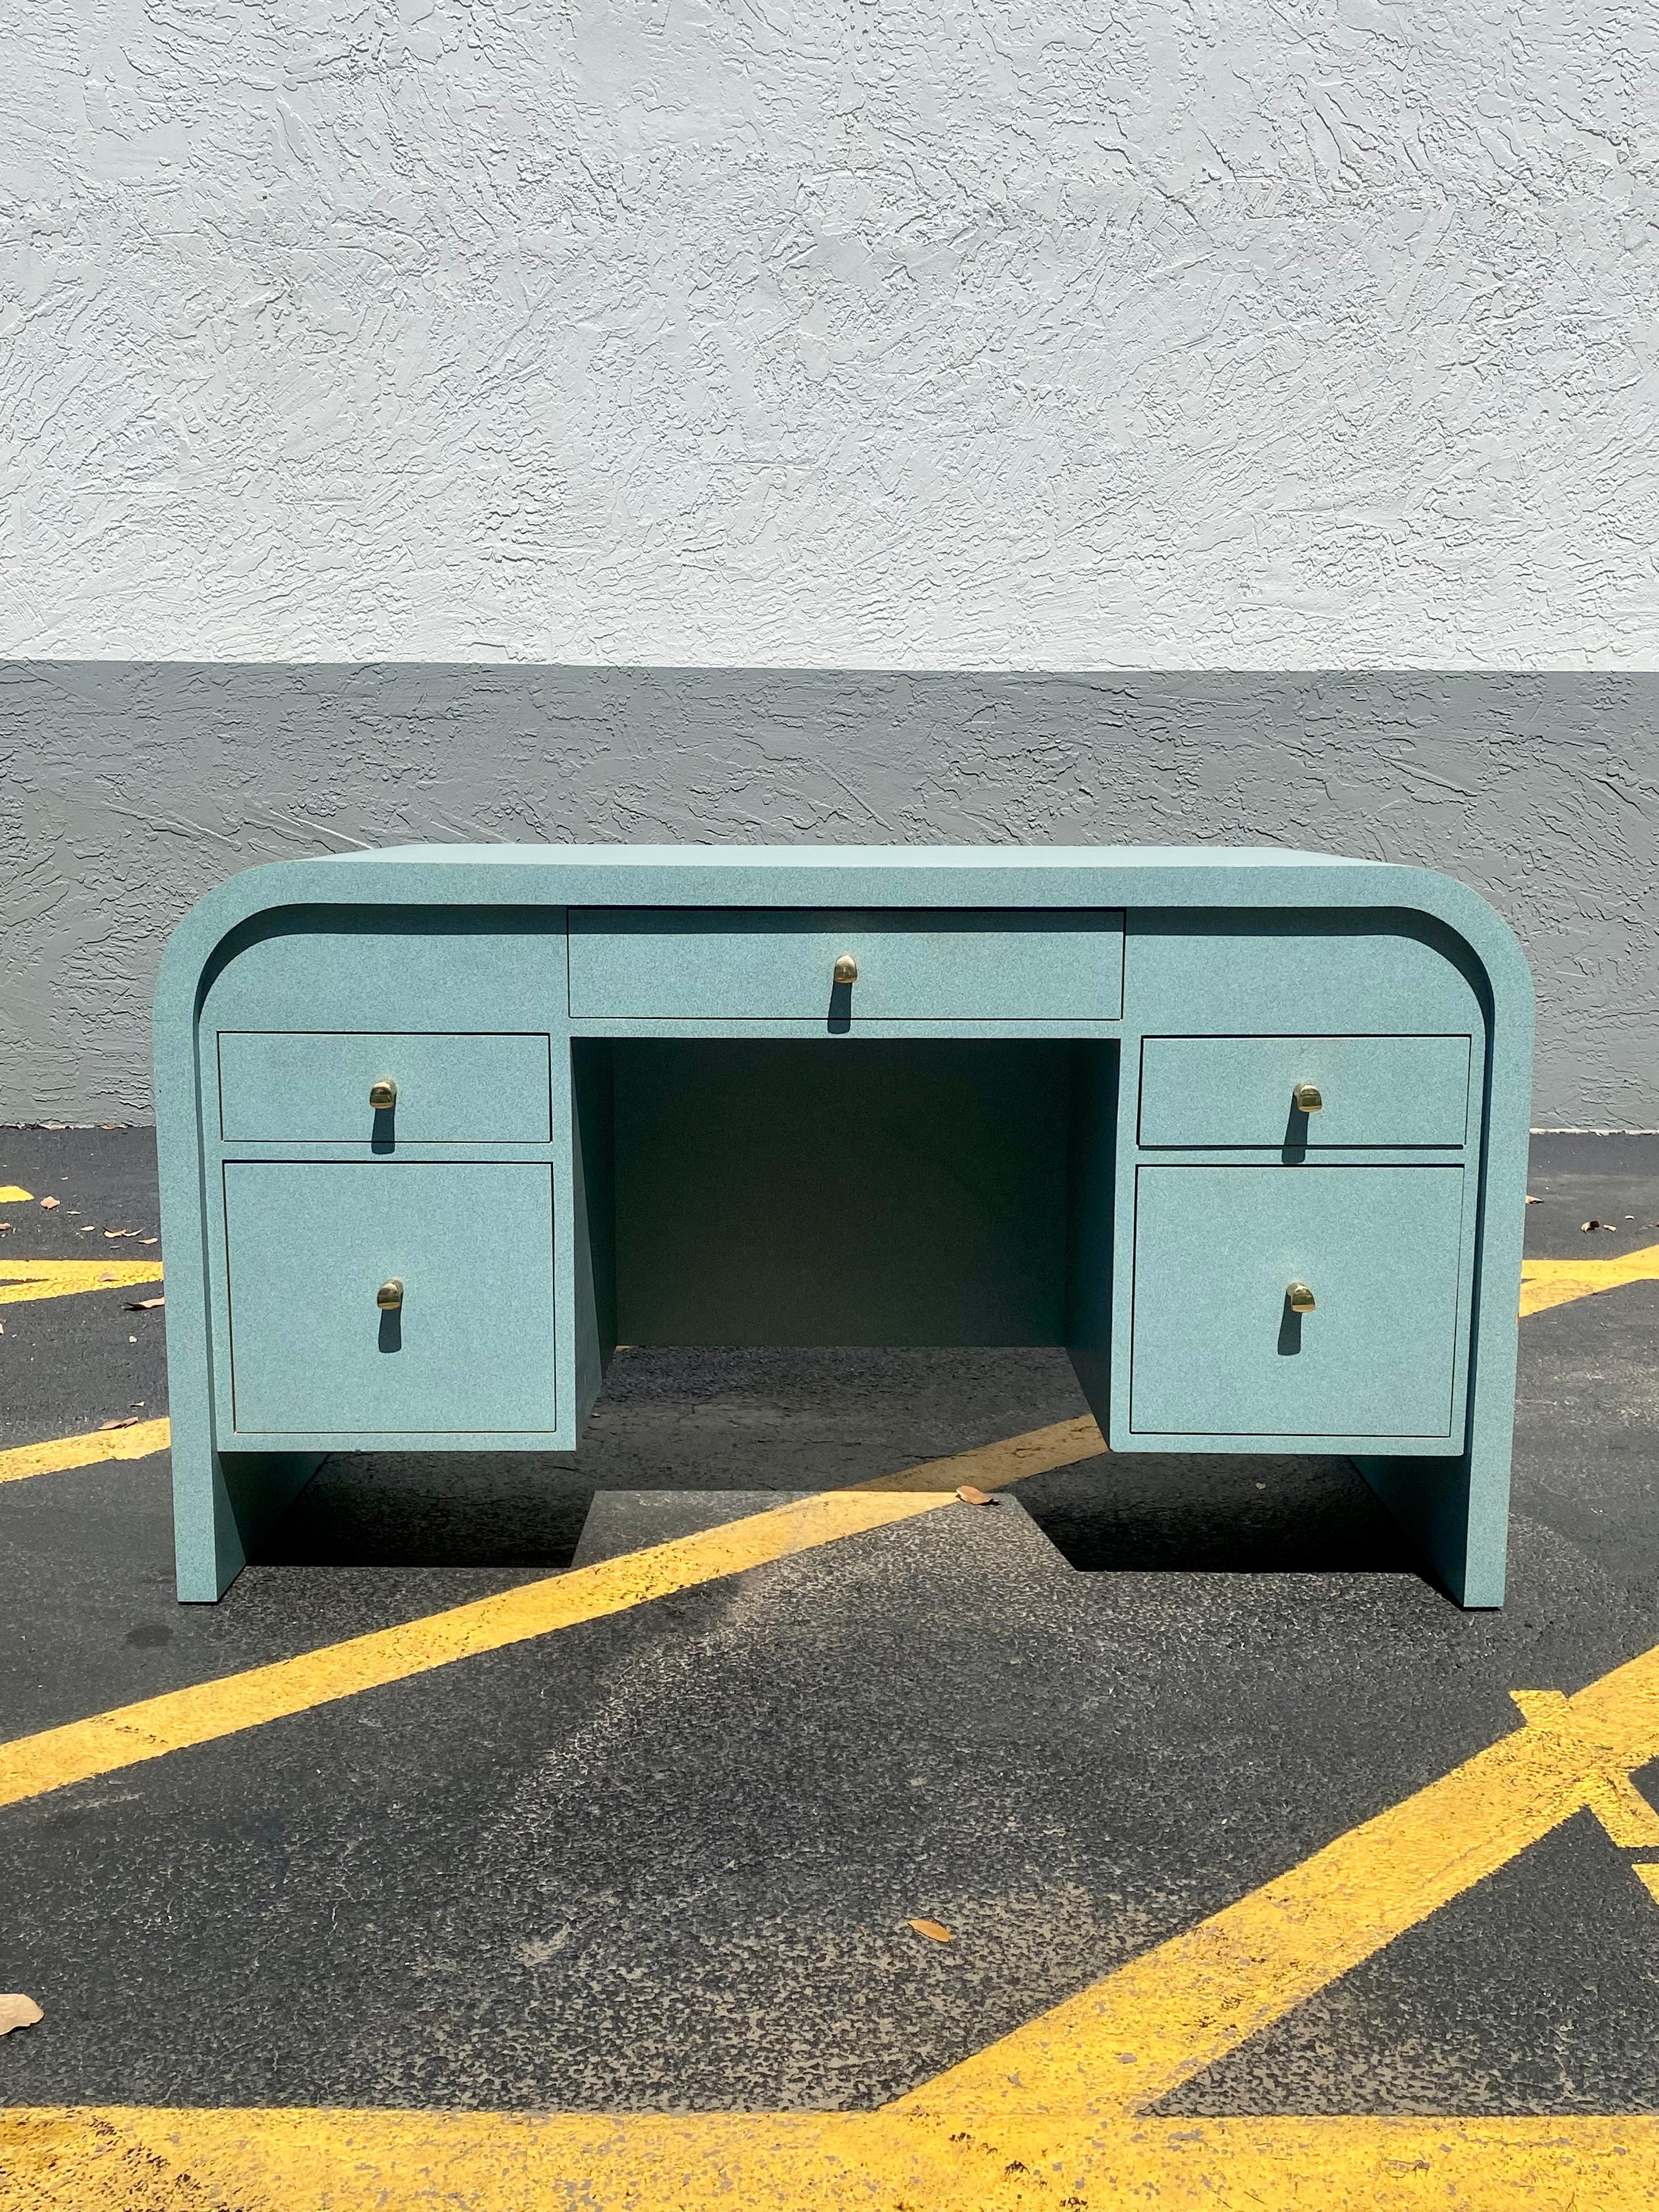 On offer on this occasion is one of the most stunning and one of a kind, Tiffany teal laminate over solid wood desk you could hope to find. Outstanding design is exhibited throughout. Cane back details with brass hardware. The beautiful desk is